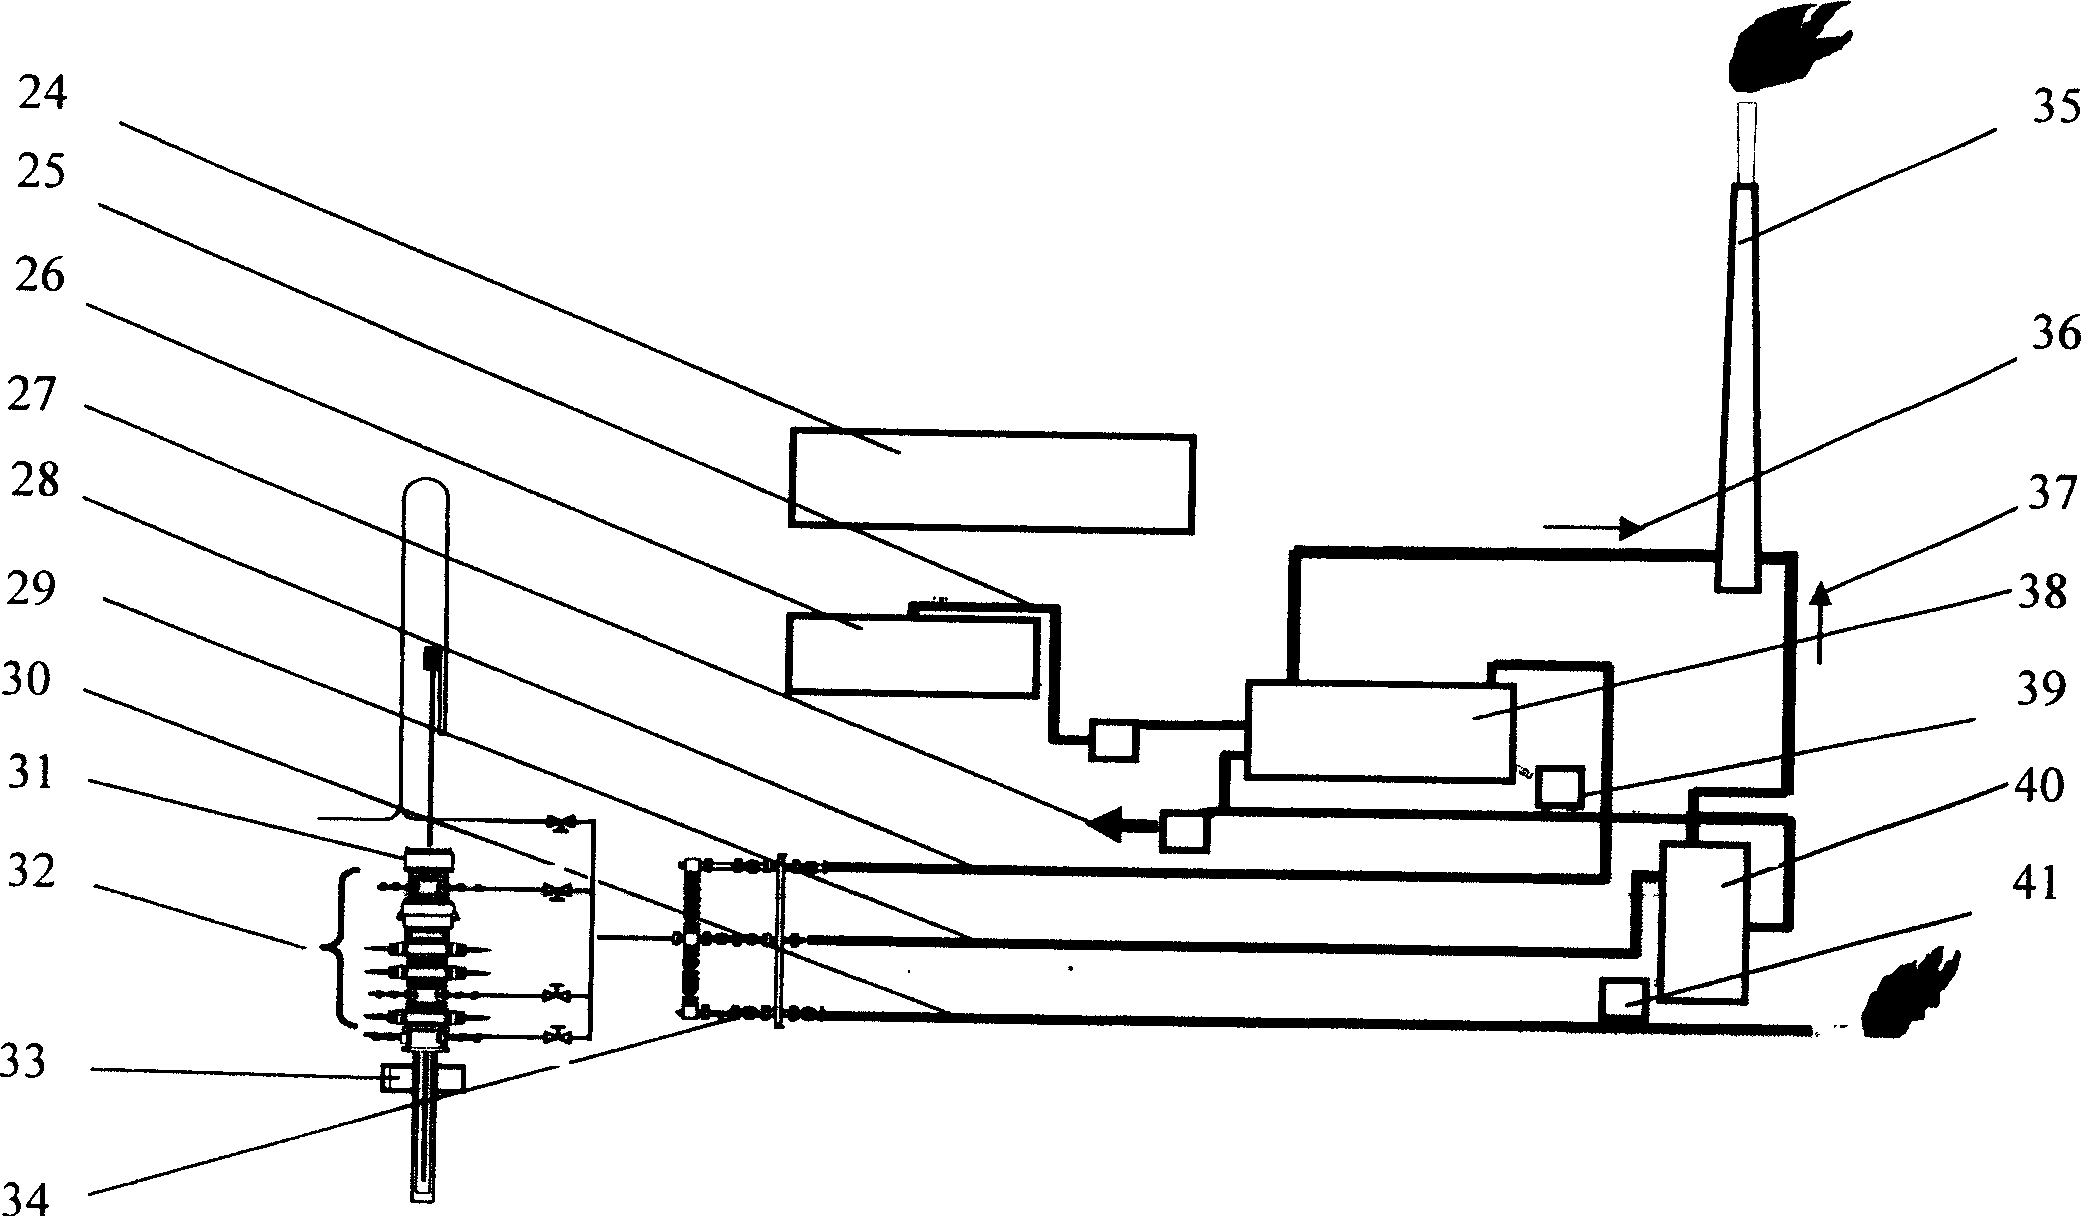 Continuous circulation system for oil and gas well and usage thereof